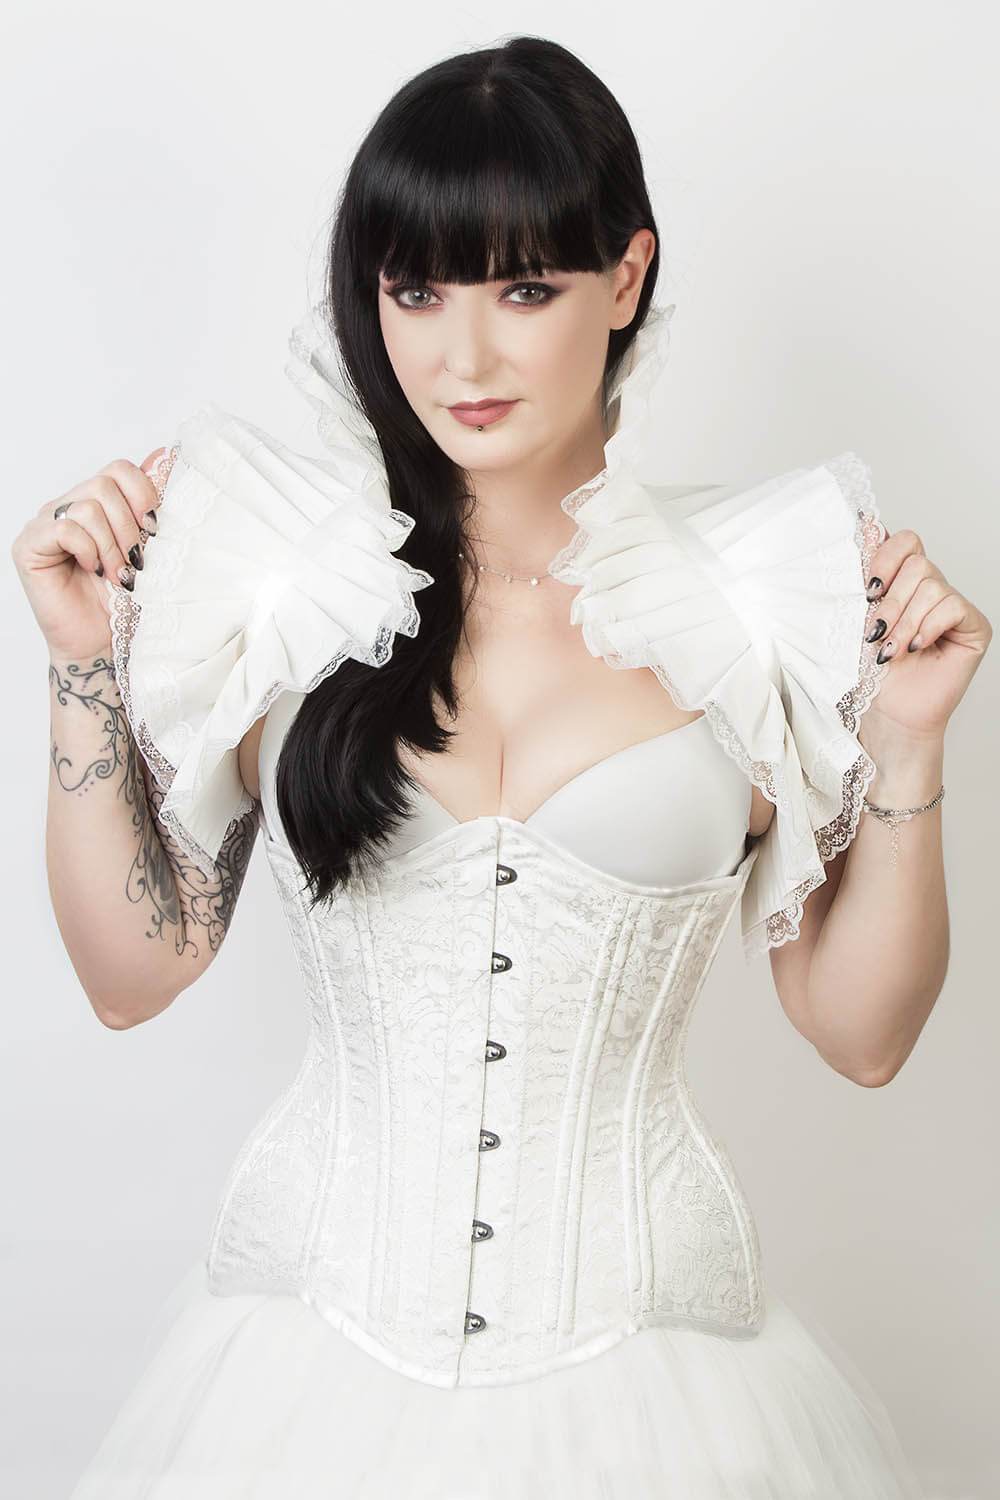 Get Custom Made Corset & Ivory Corset from us at the lowest price